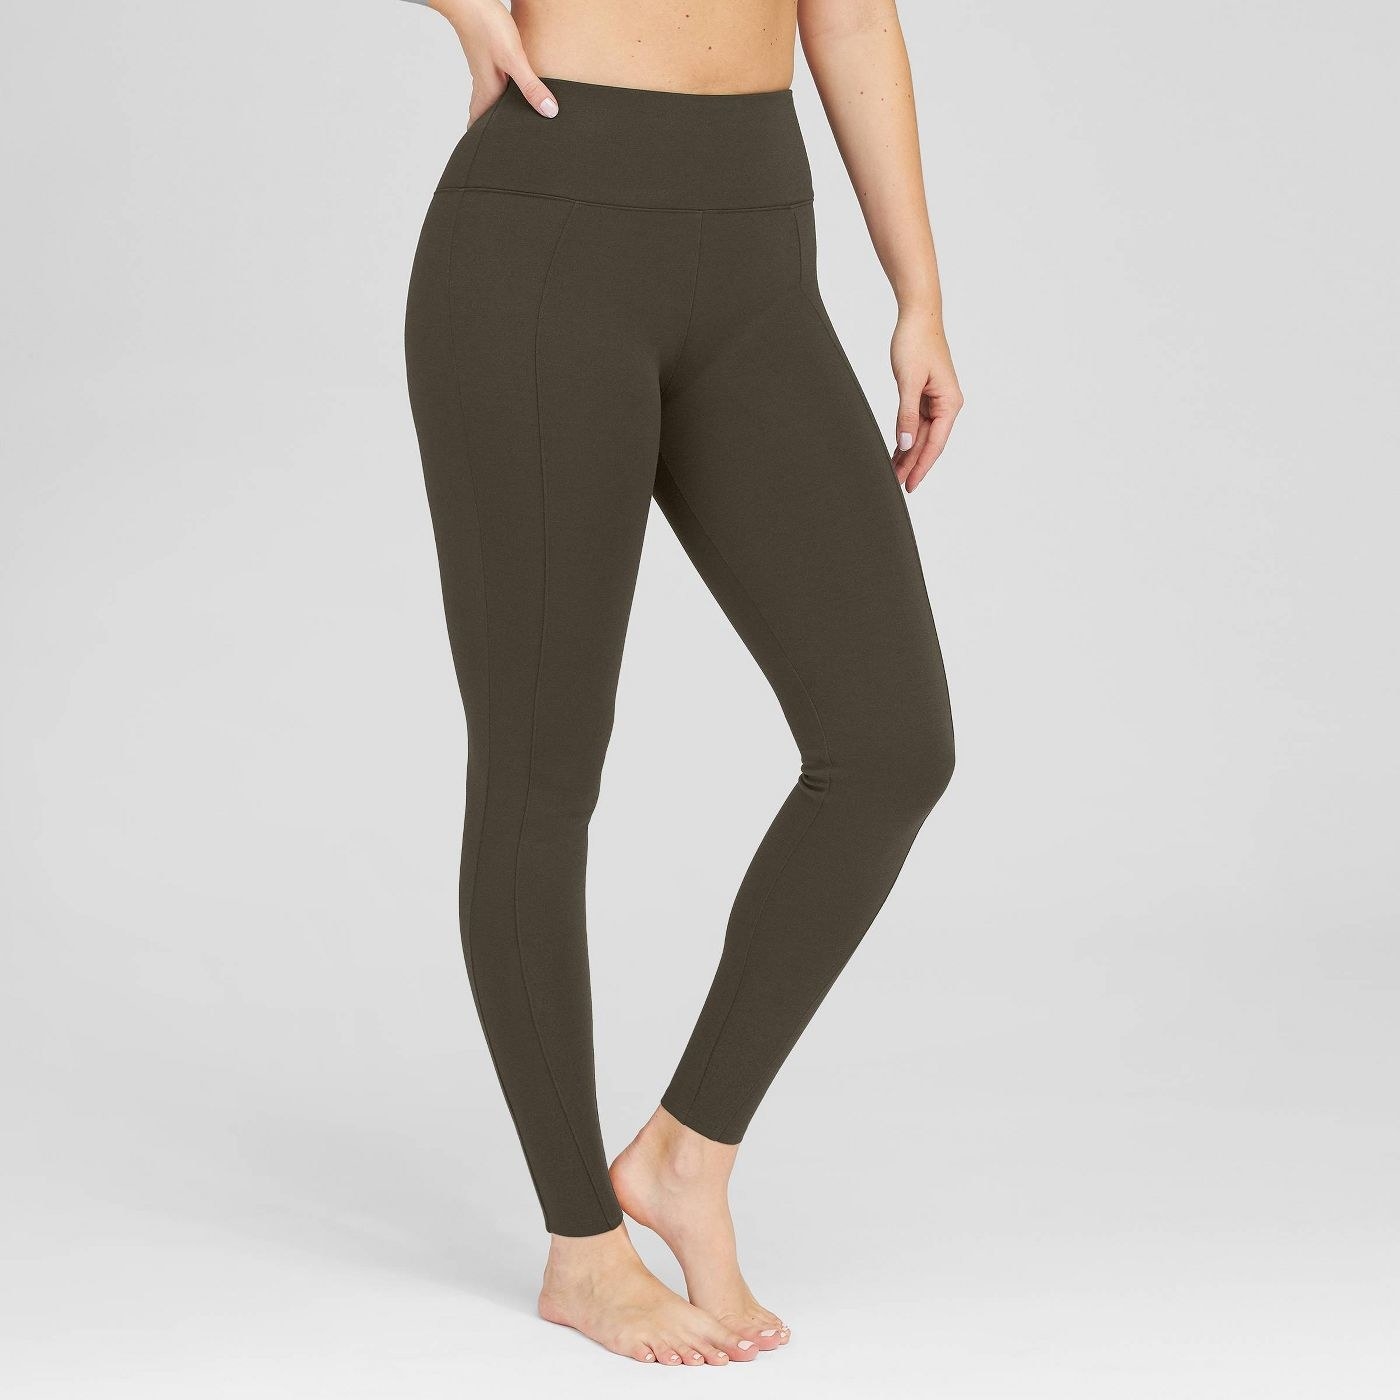 A pair of olive green leggings